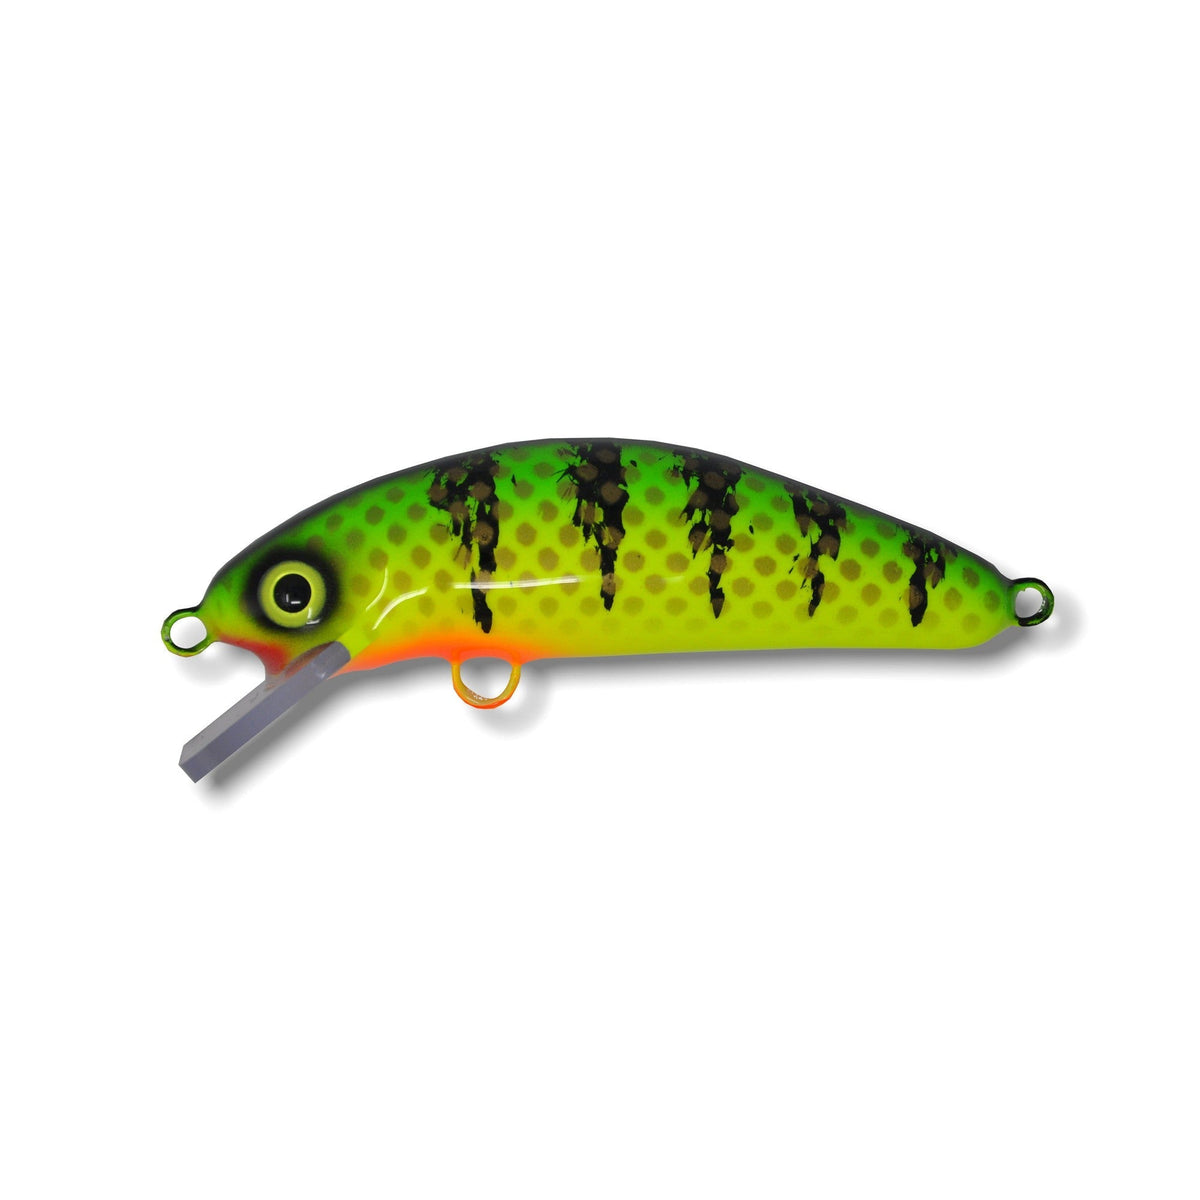 View of Crankbaits Blue Water Baits 6" Fat Chub Crankbait Hot Perch / Orange Belly available at EZOKO Pike and Musky Shop